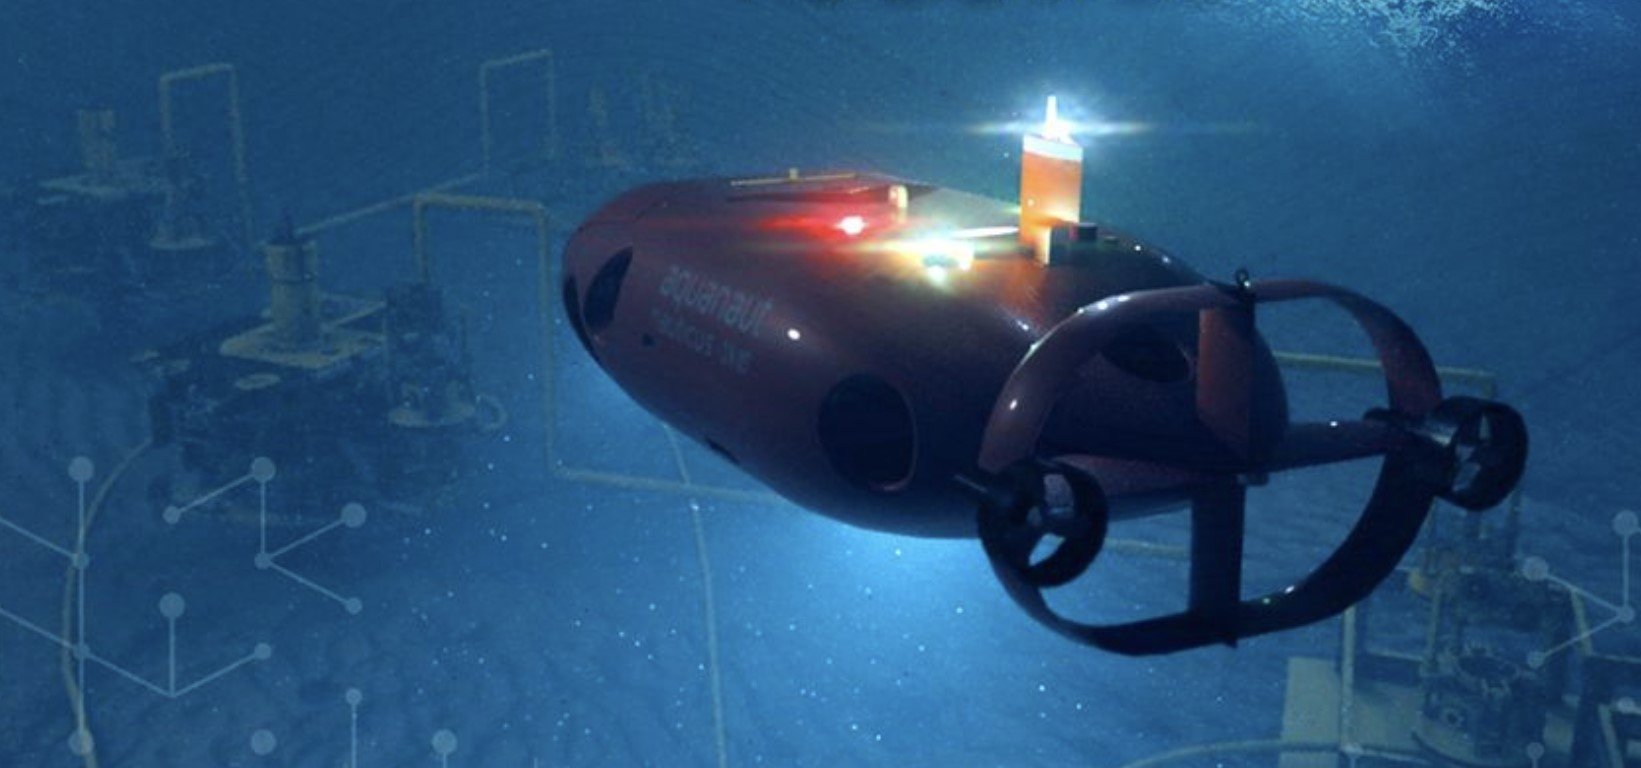 Aquanaut subsea robot gets to work for Shell